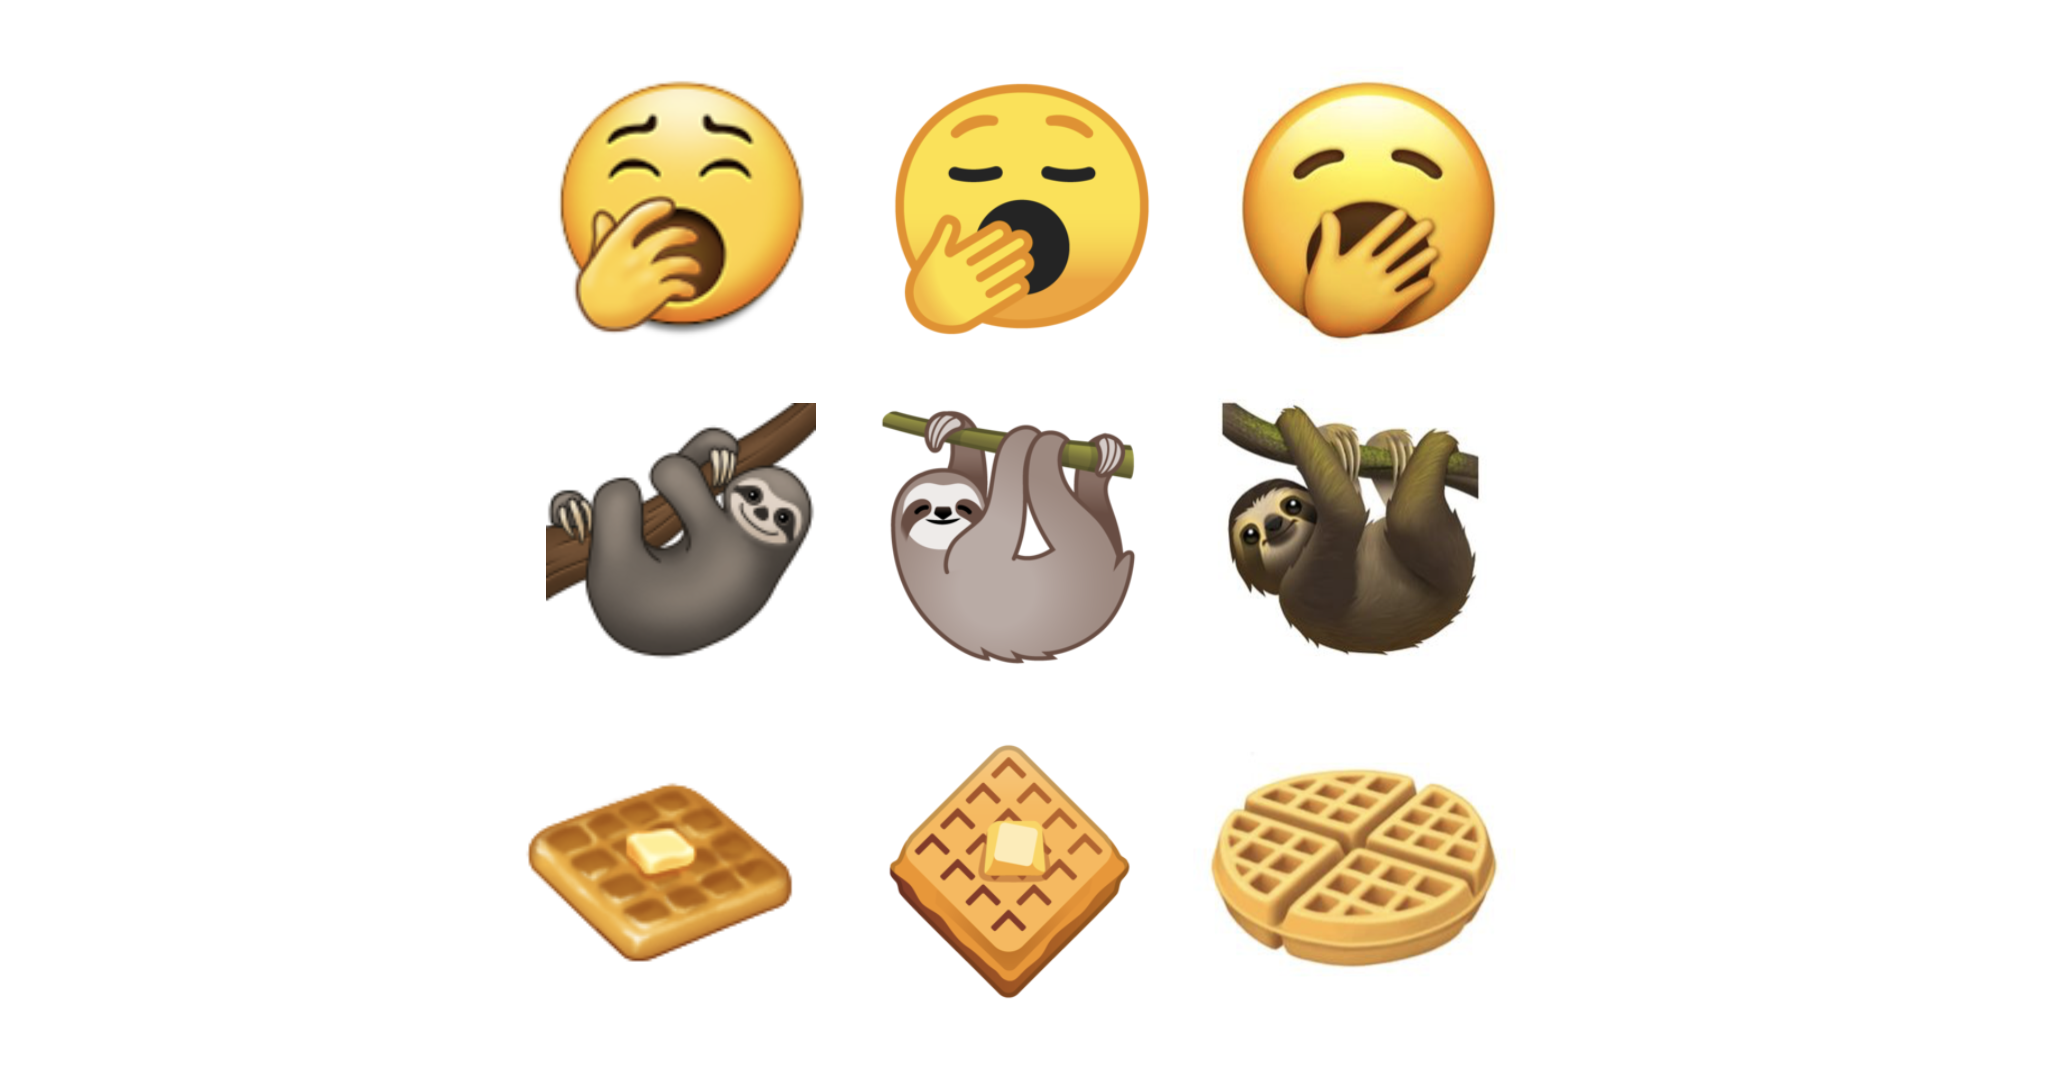 When are the new emojis coming out?